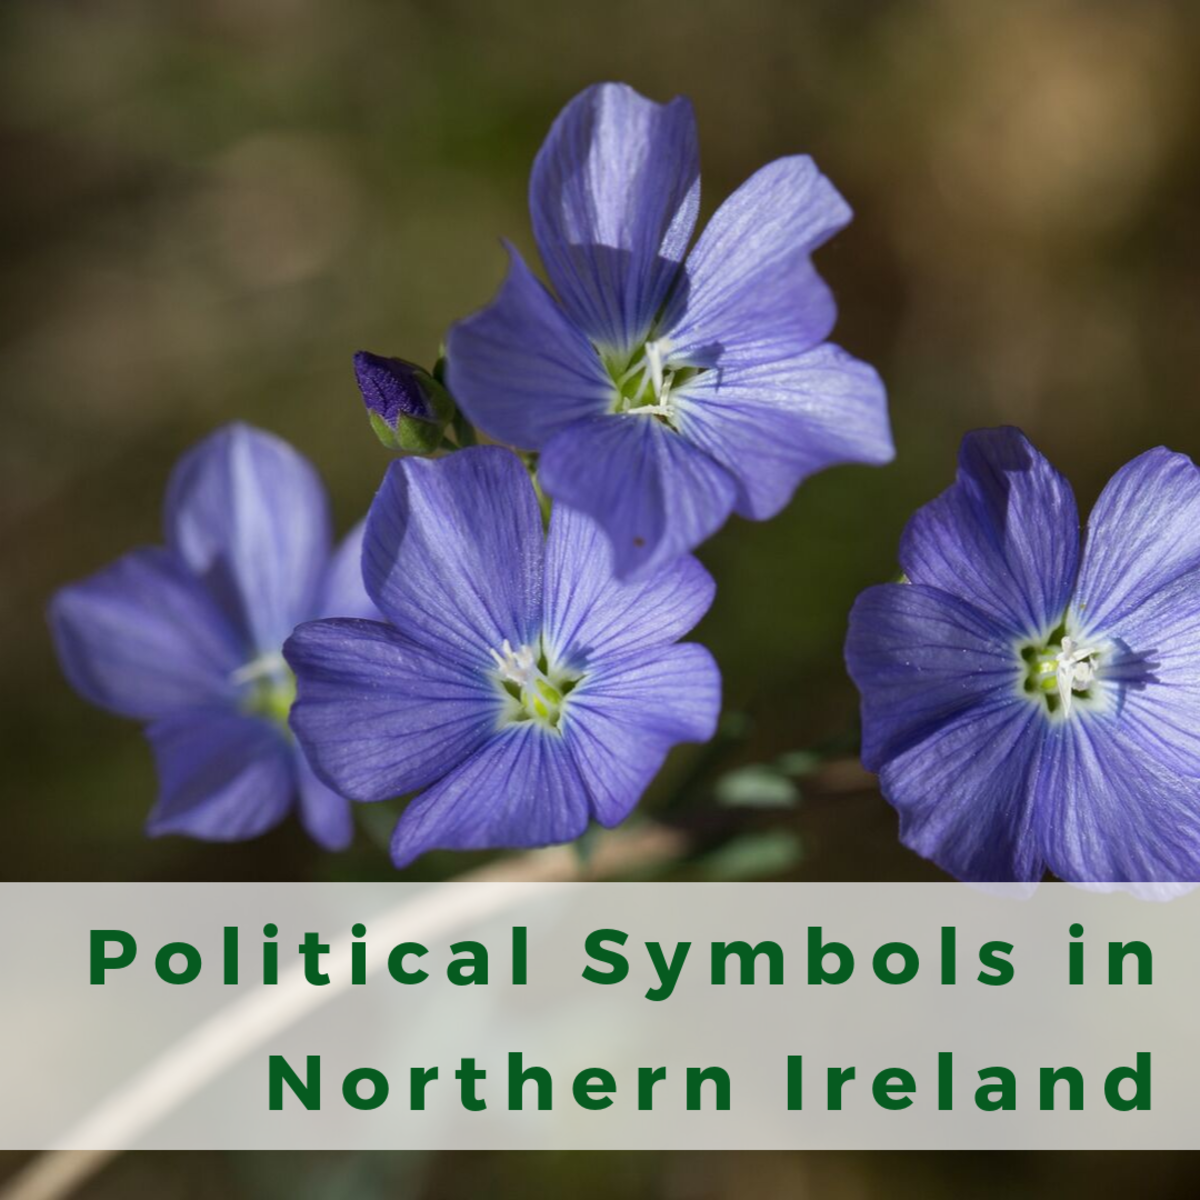 A Guide to Shared and Contested Political Symbols in Northern Ireland